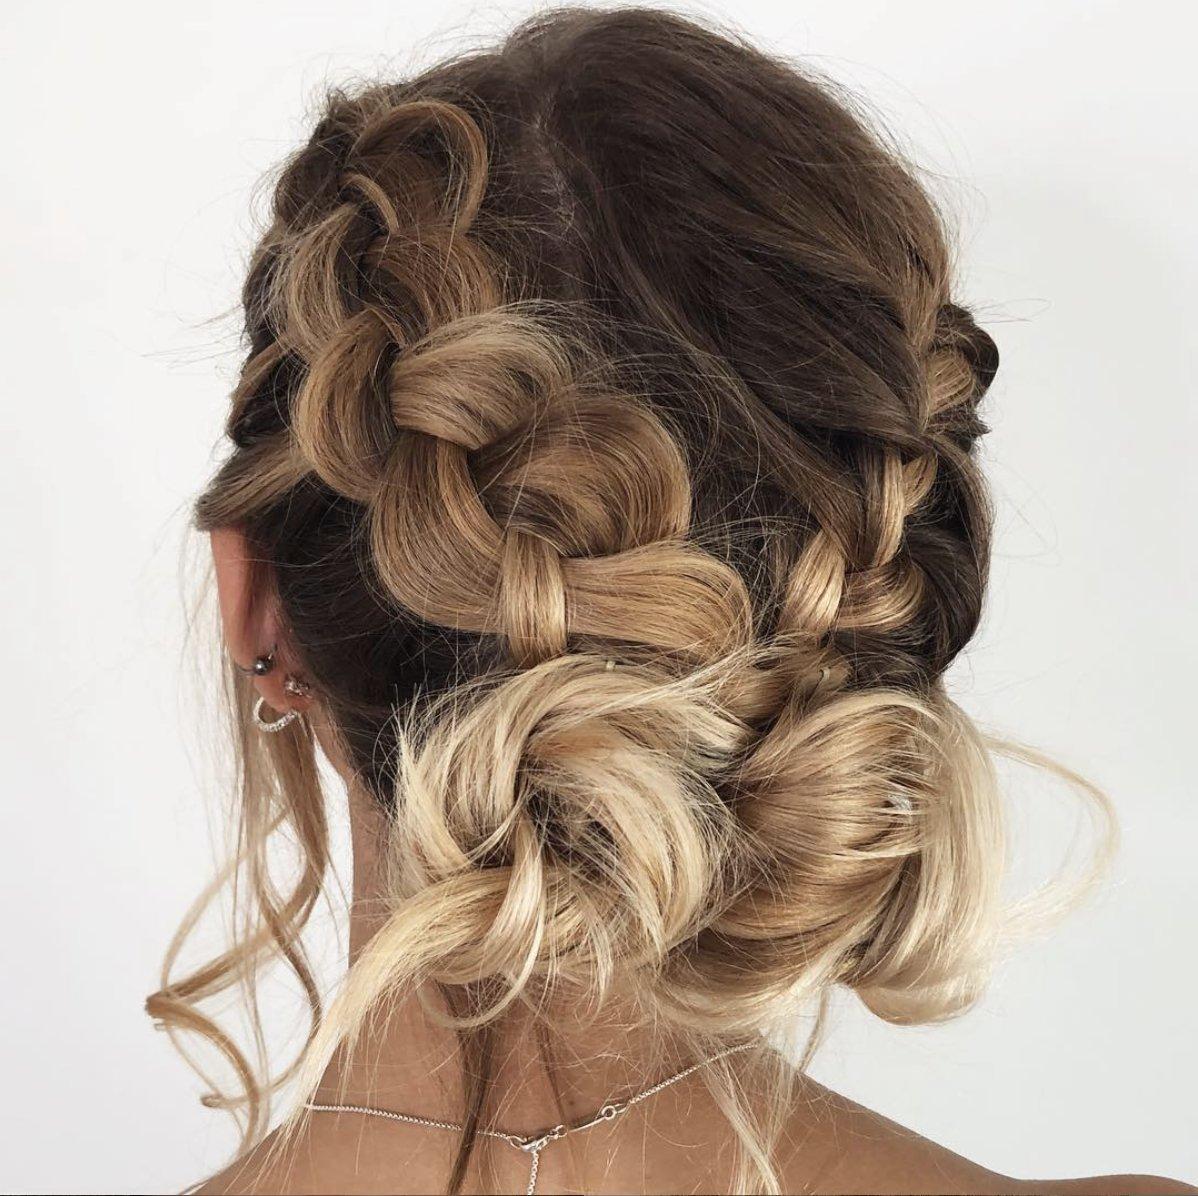 55 Chic Wedding Hairstyles for Long Hair - hitched.co.uk